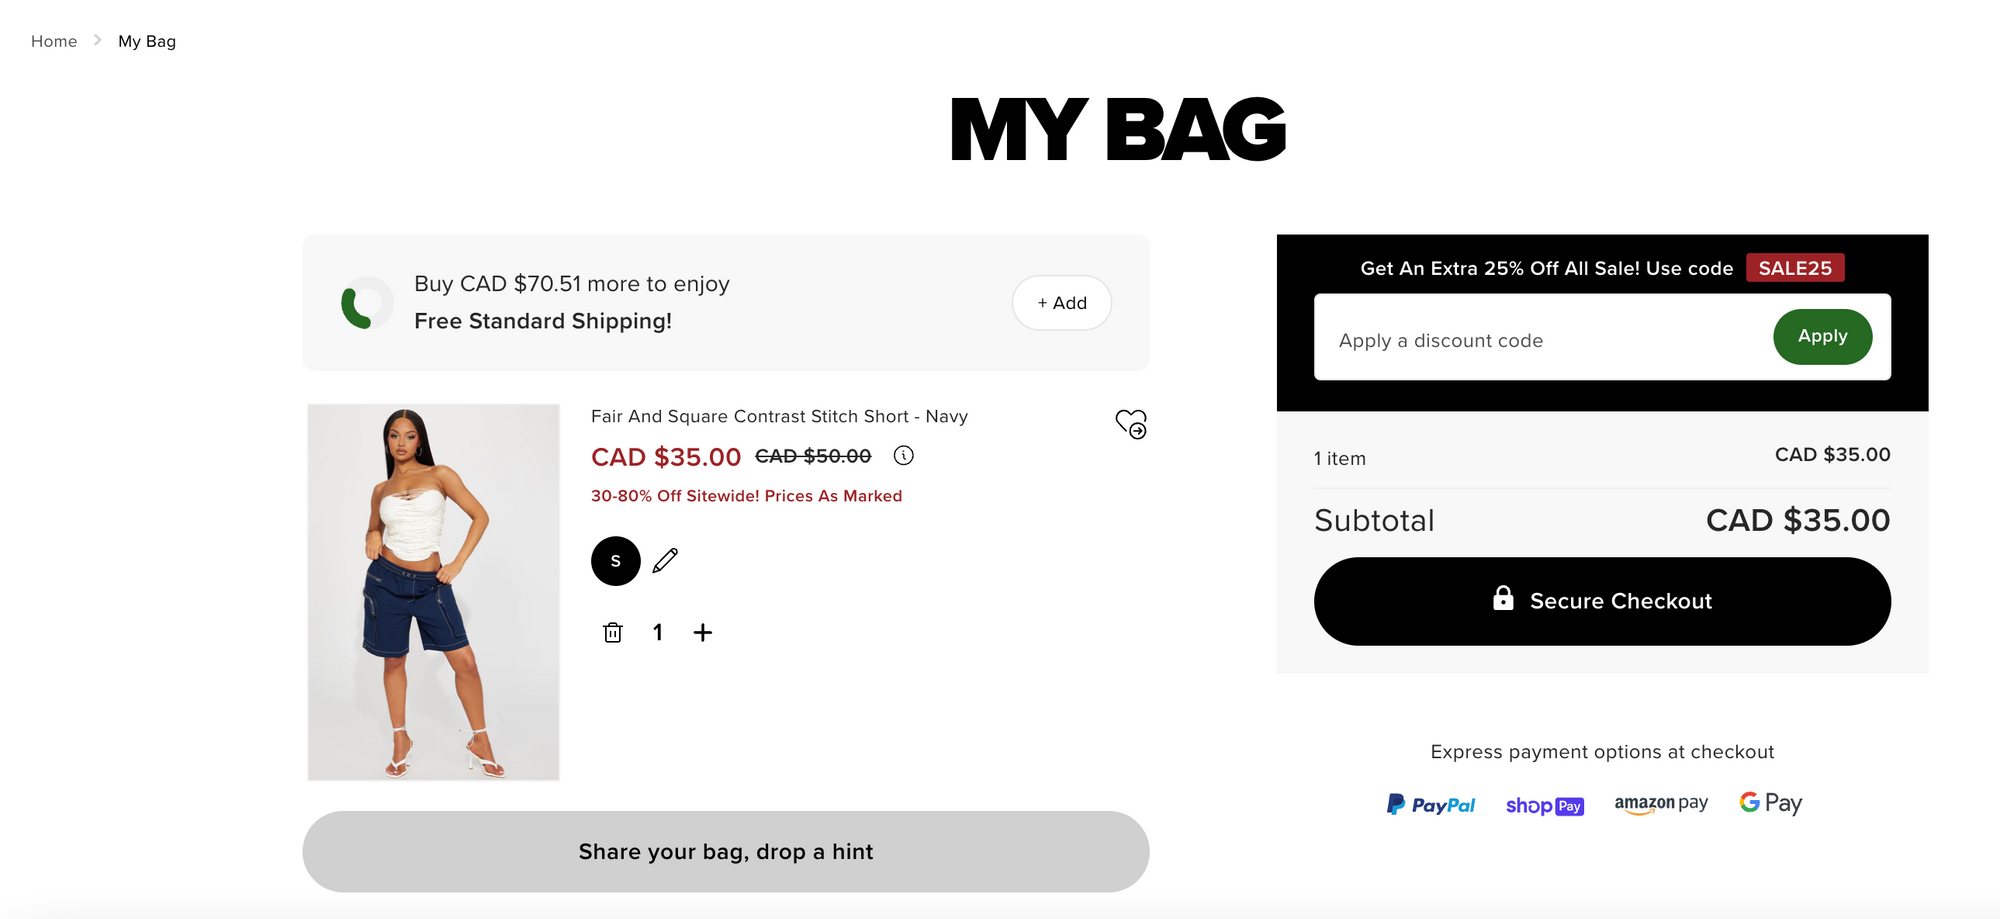 Fashion Nova encourages customers to share their cart on social media channels